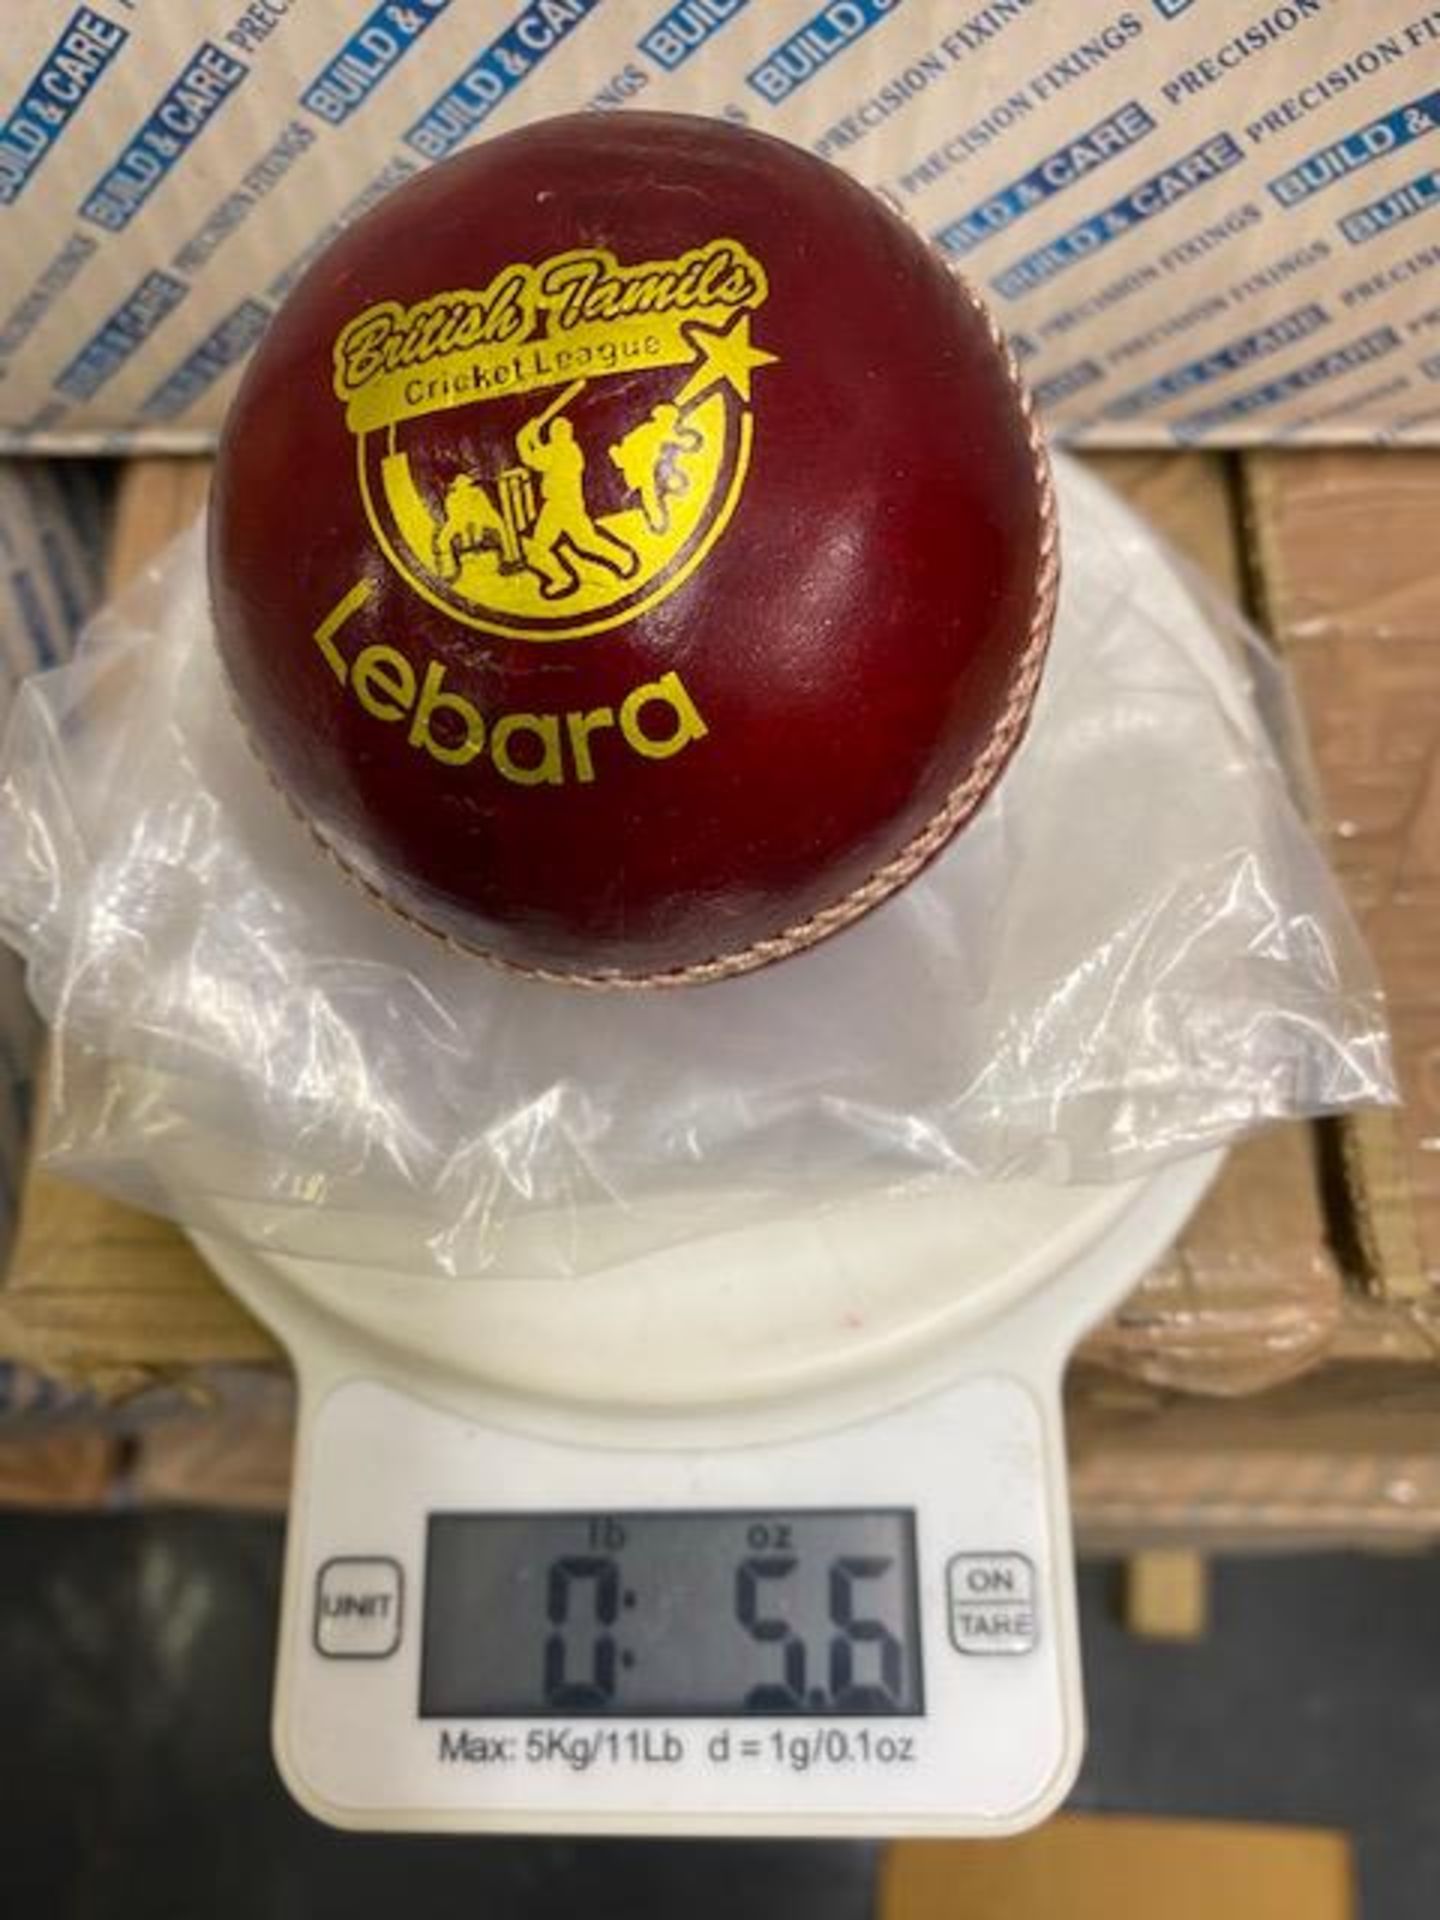 Thirty six Lebara red 5.5oz cricket balls branded with British Tamile cricket league